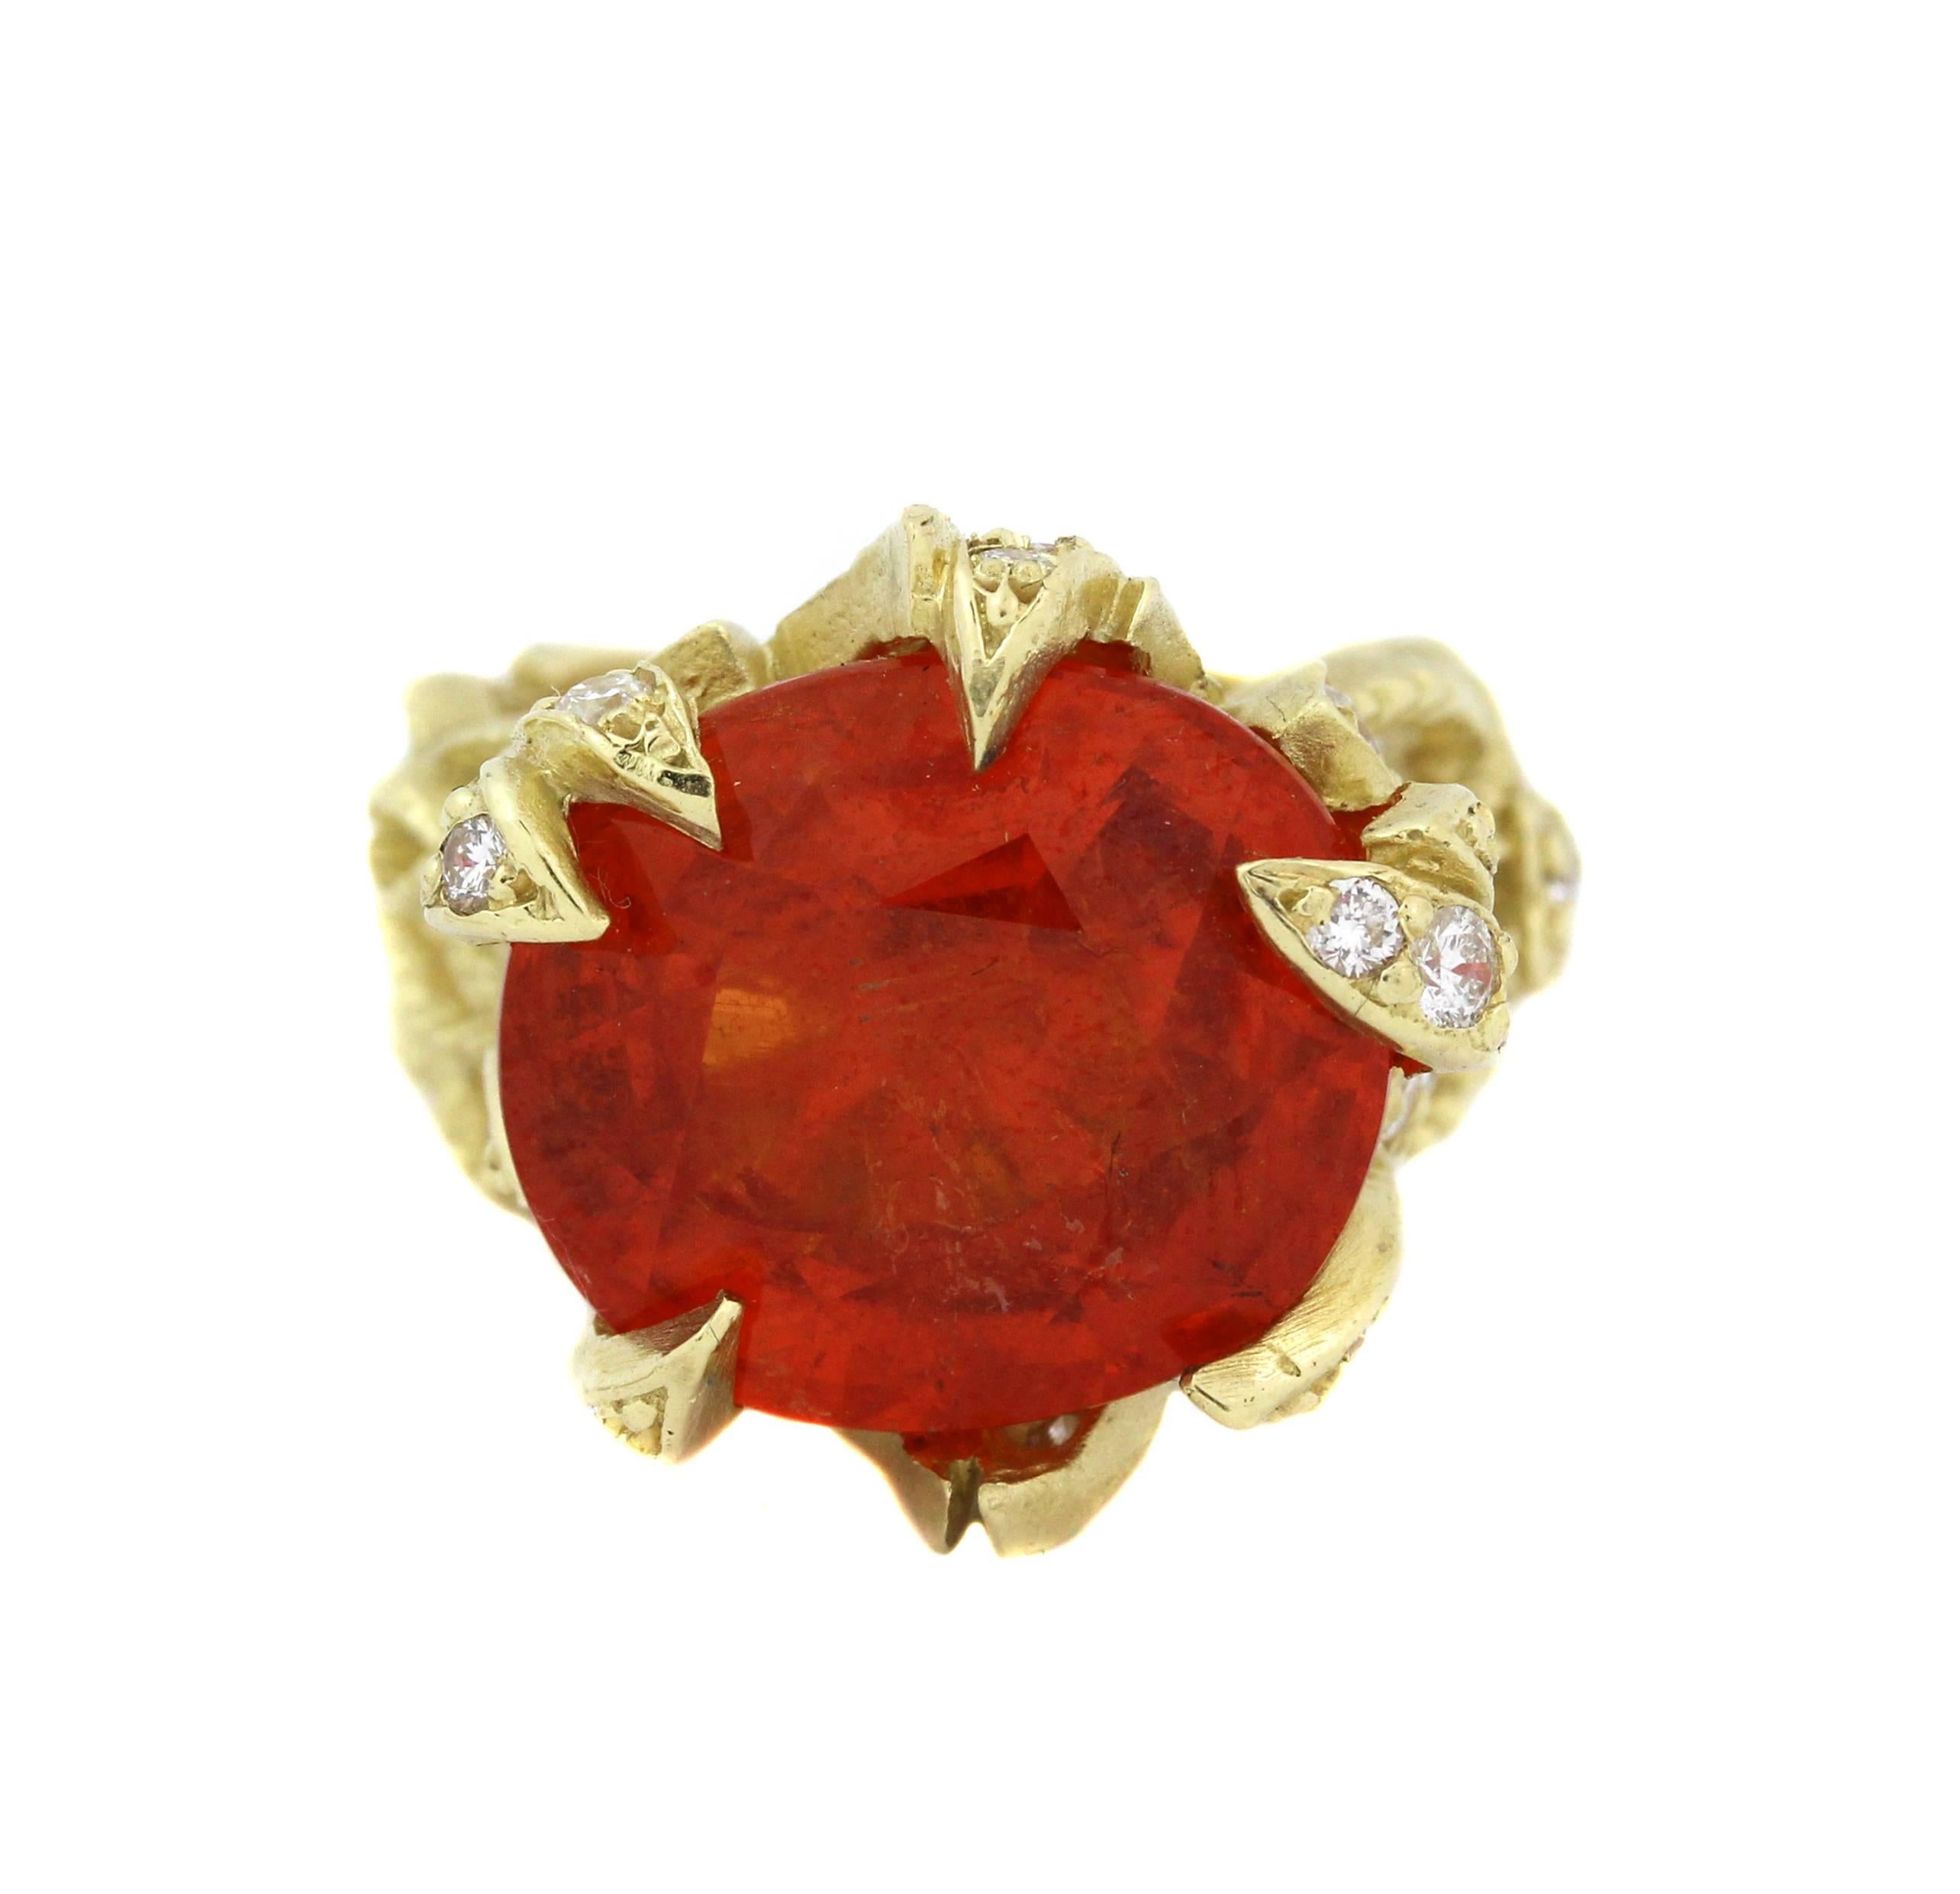 18K Yellow Gold Ring with Spessartite Garnet Center and Diamonds

This Mandarin orange spessartite Garnet has such vibrant and gorgeous color. Truly beautiful conversation piece. Weighing 17.22ct. 

1.26ct. G Color, VS Clarity Diamonds are set